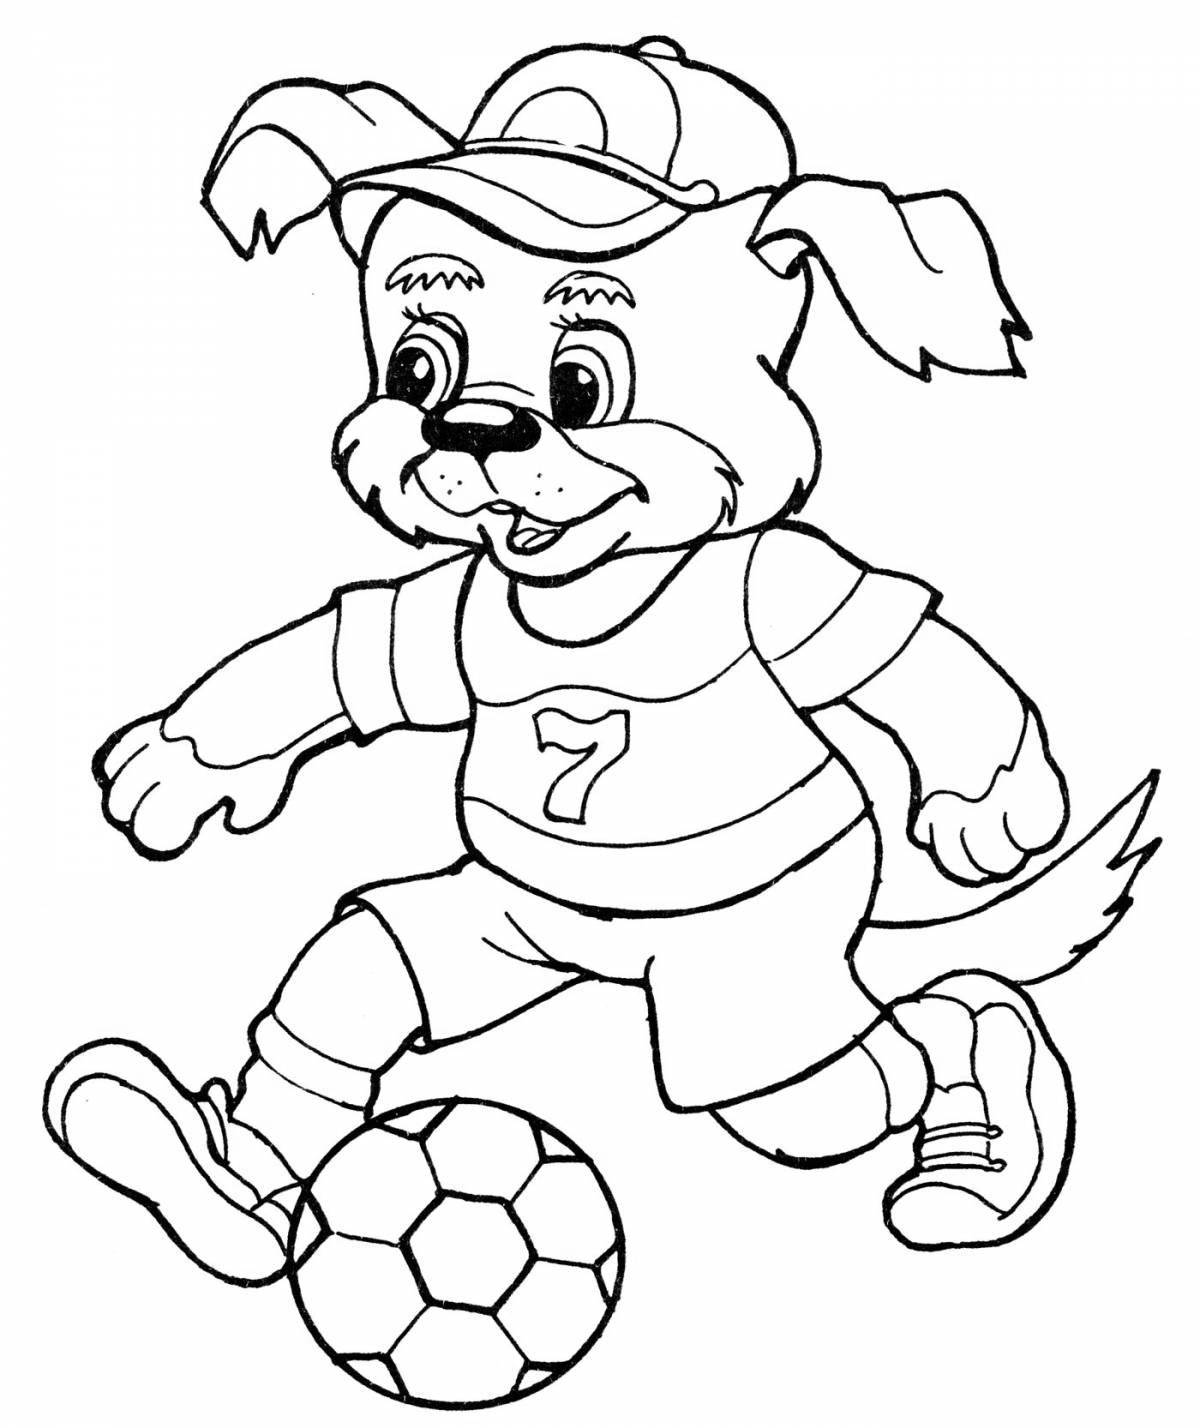 Adorable football coloring book for kids